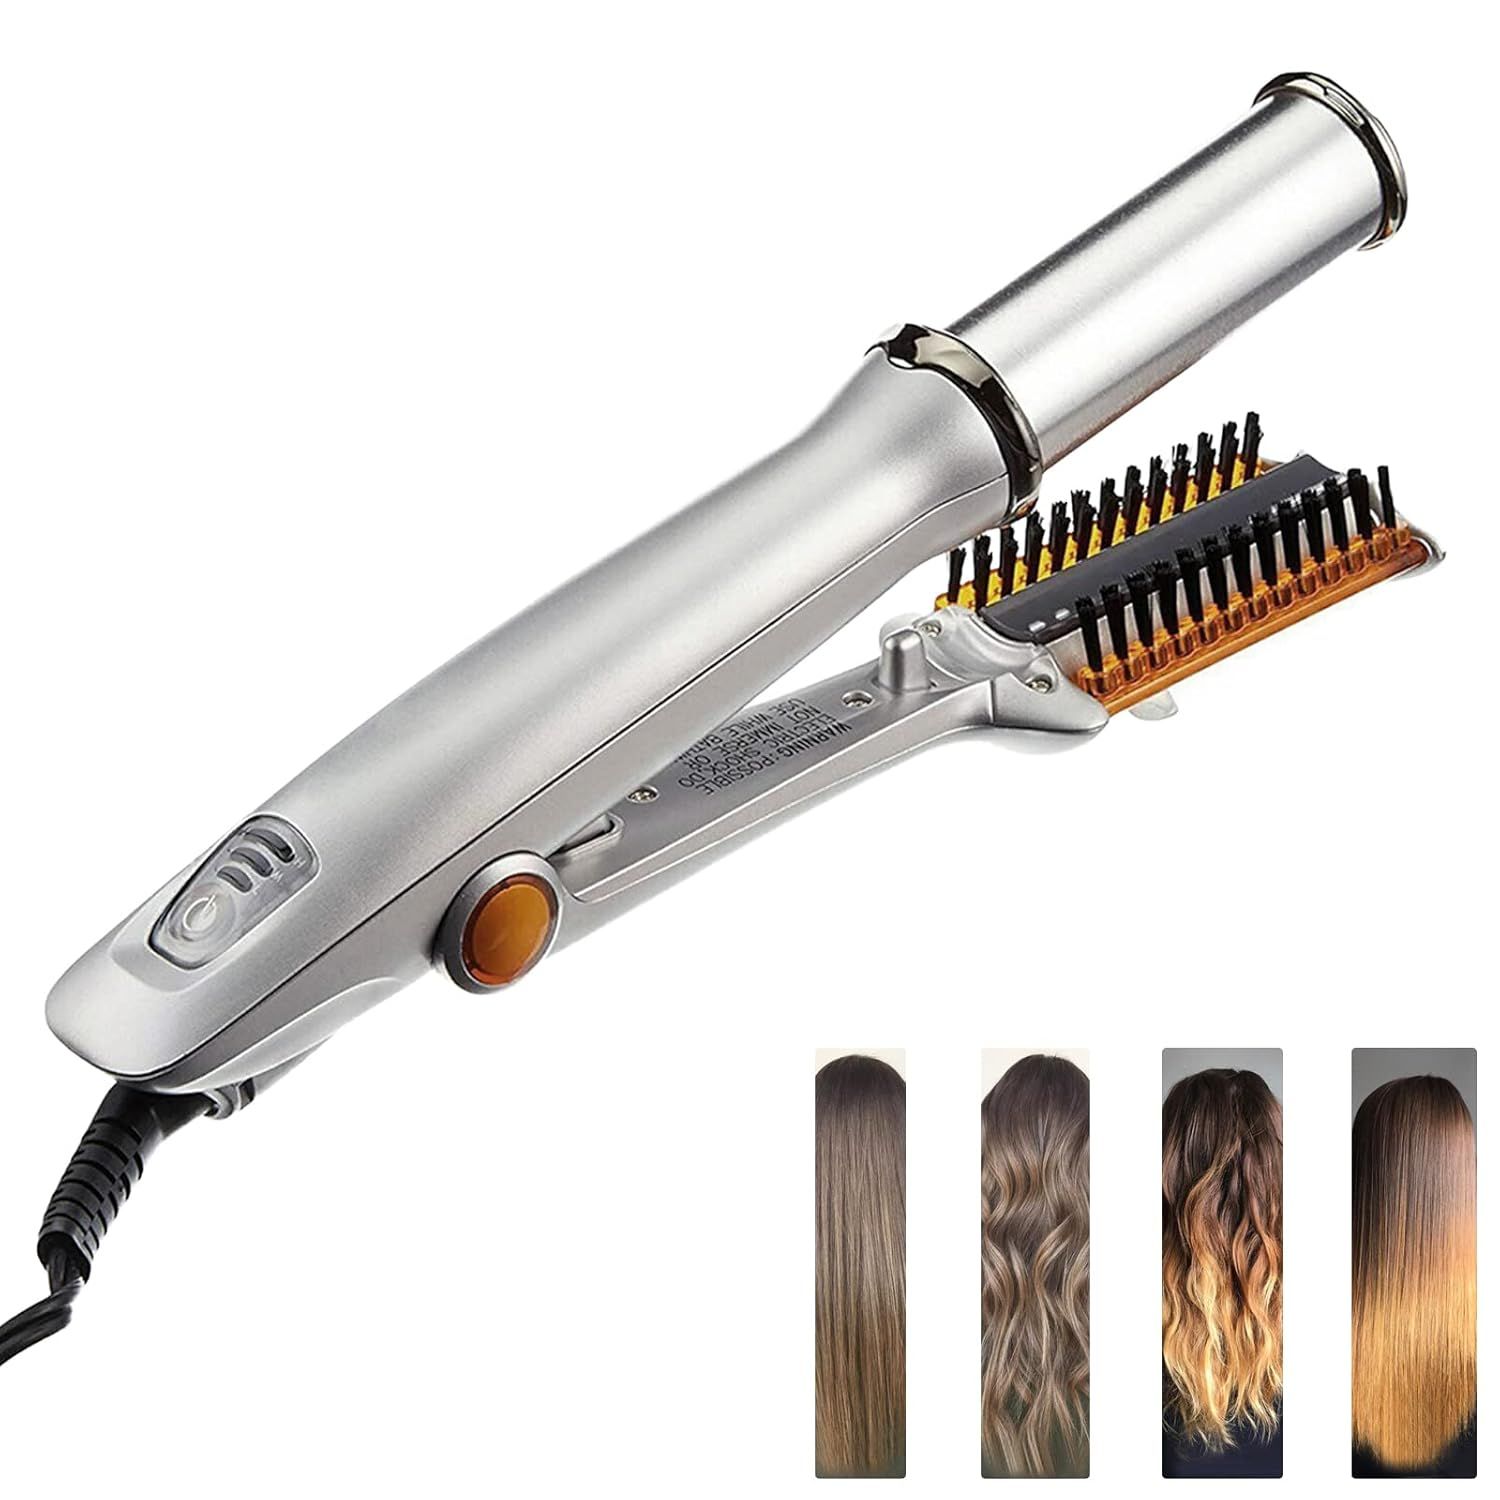 2 in 1 Straight Curling Iron, Hair Waver, Styling Tools & Appliance, Hot Tools Curling Iron, Hair... | Amazon (US)